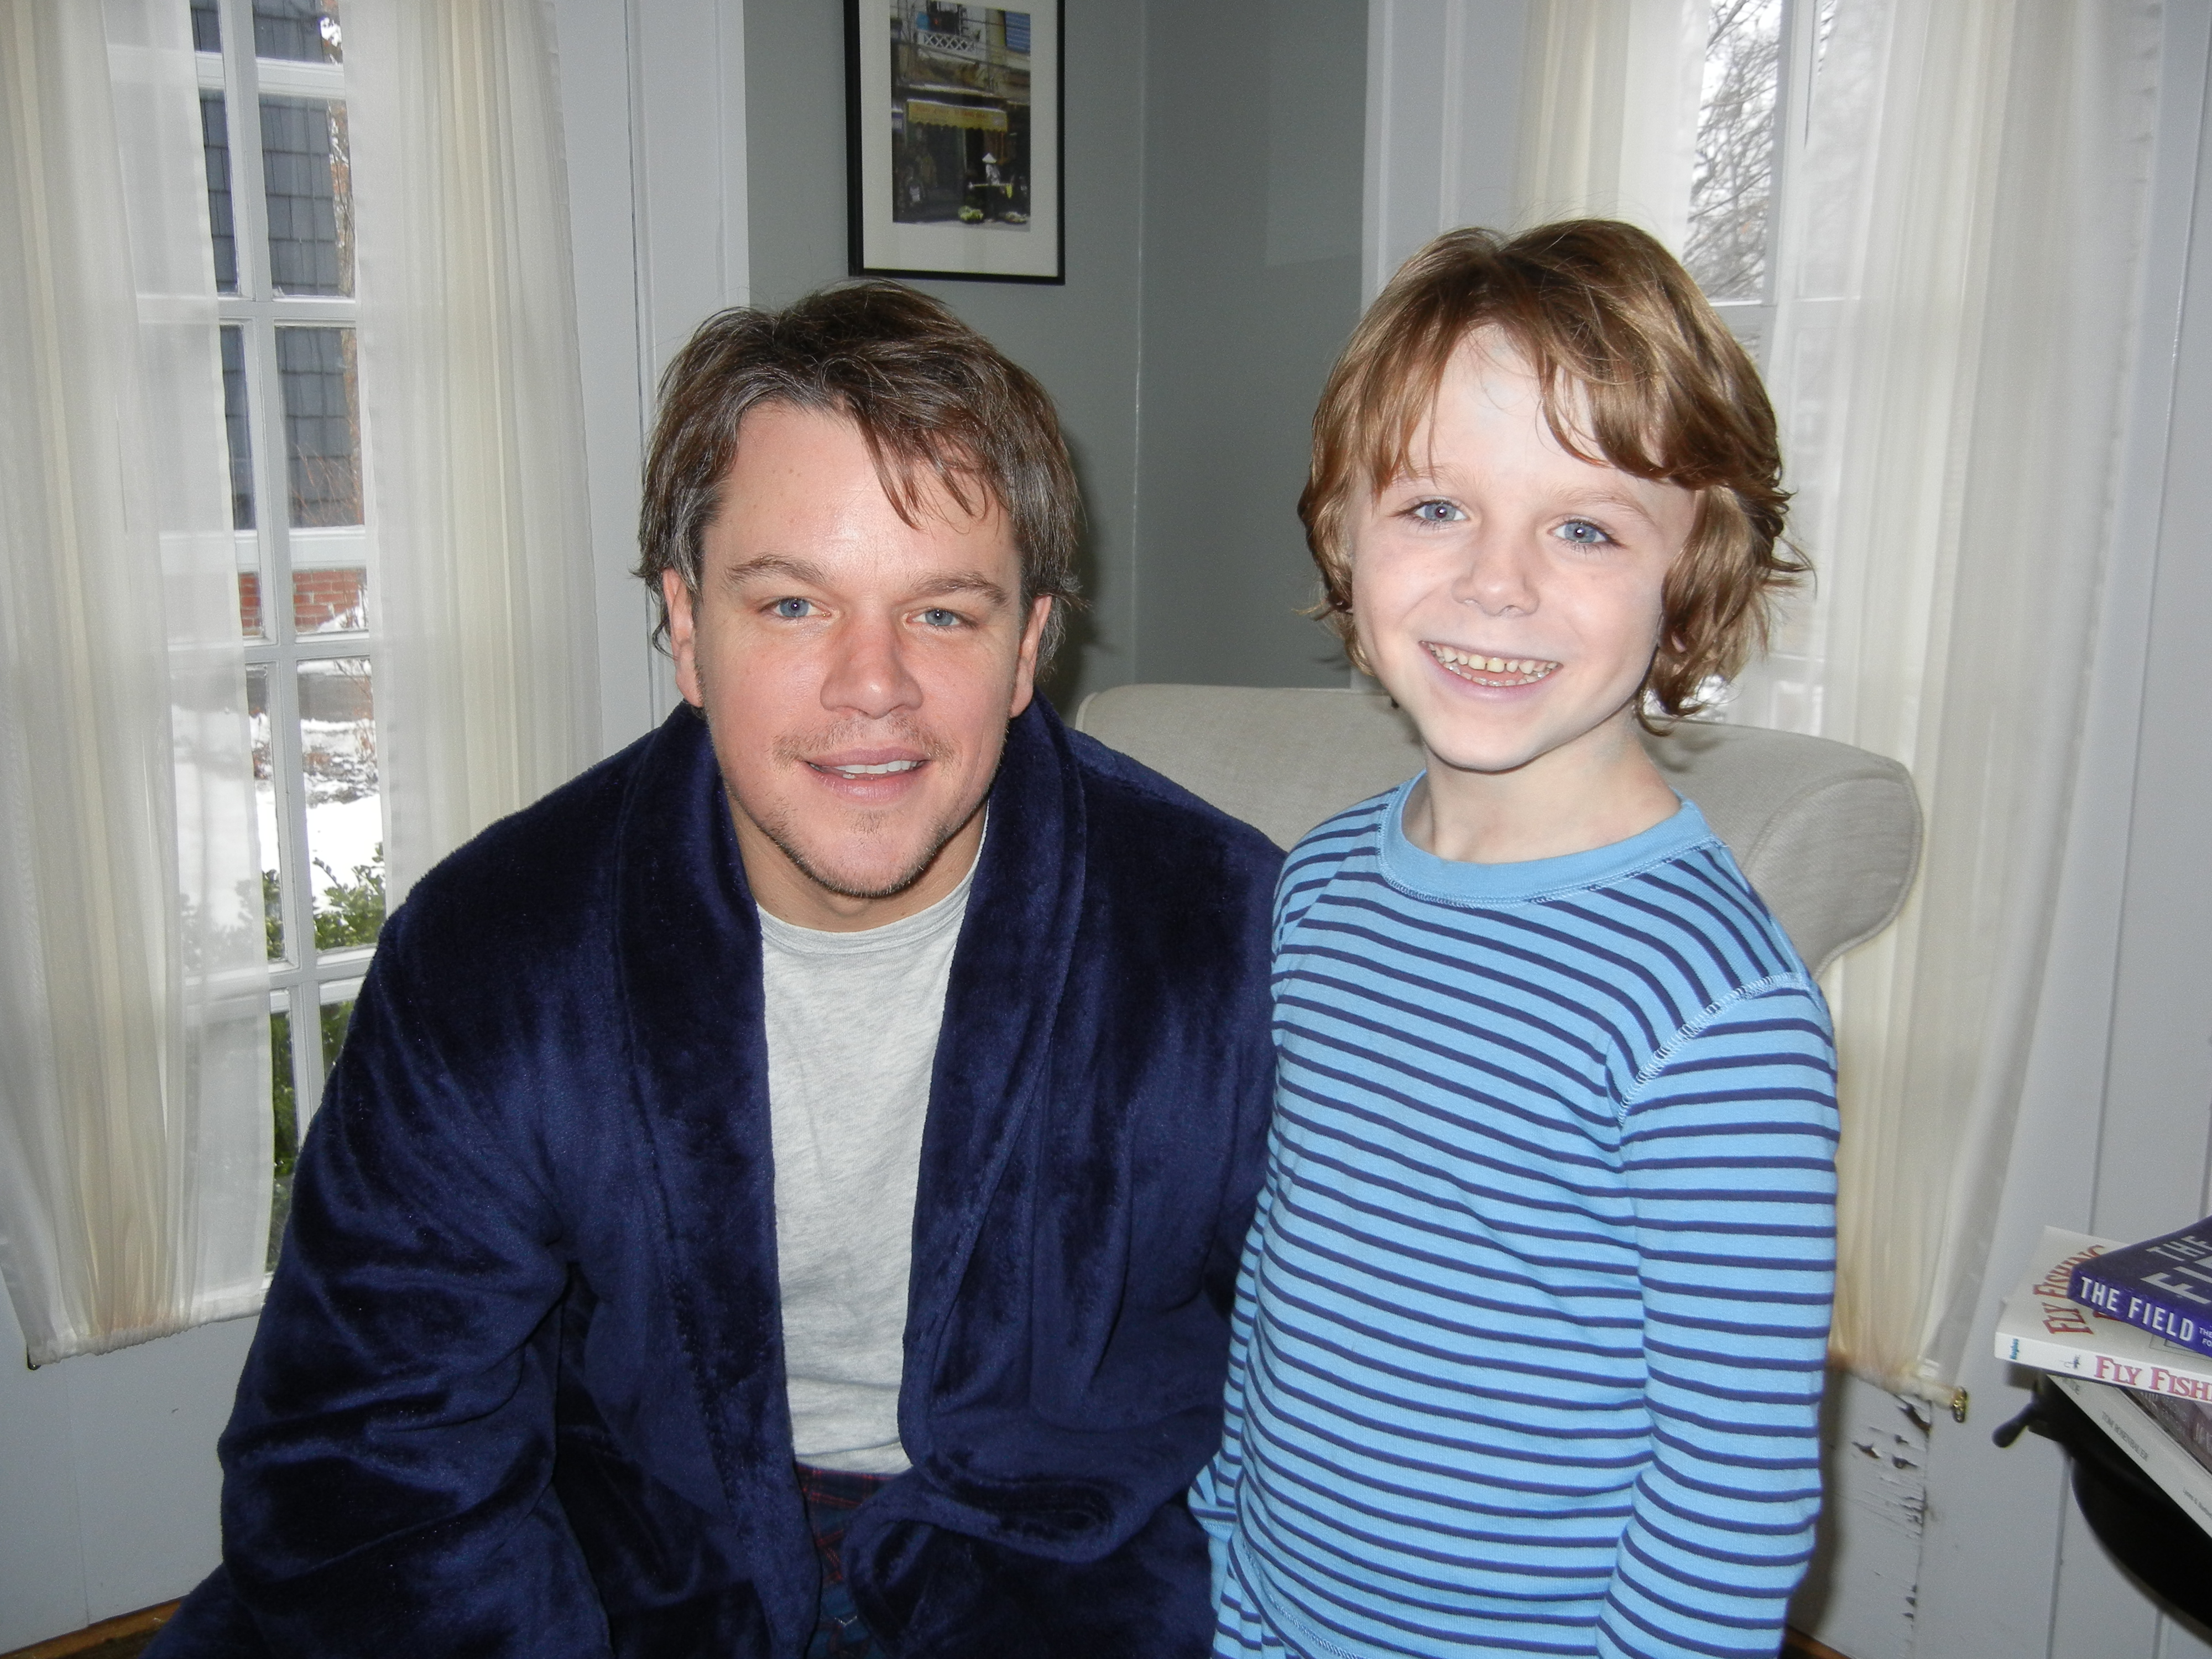 Griffin Kane with Matt Damon on the set of Contagion, 2010.